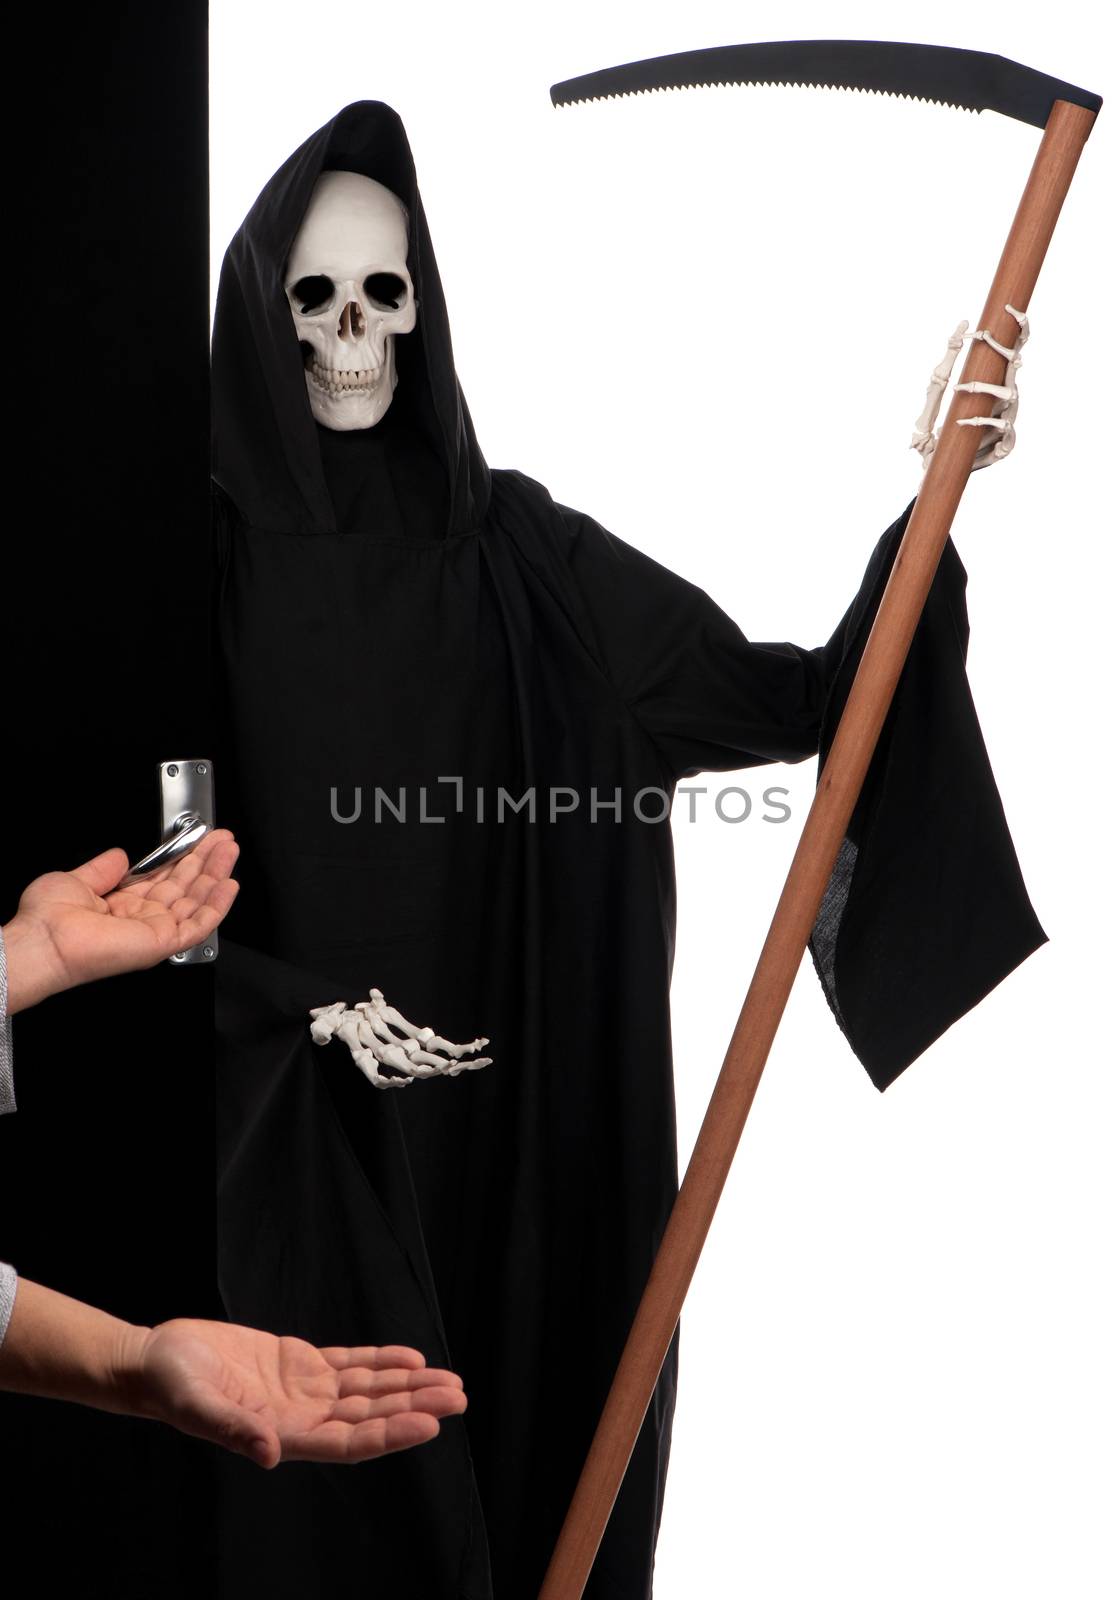 The grim reaper is pleasantly surprised when it is welcomed at the door.